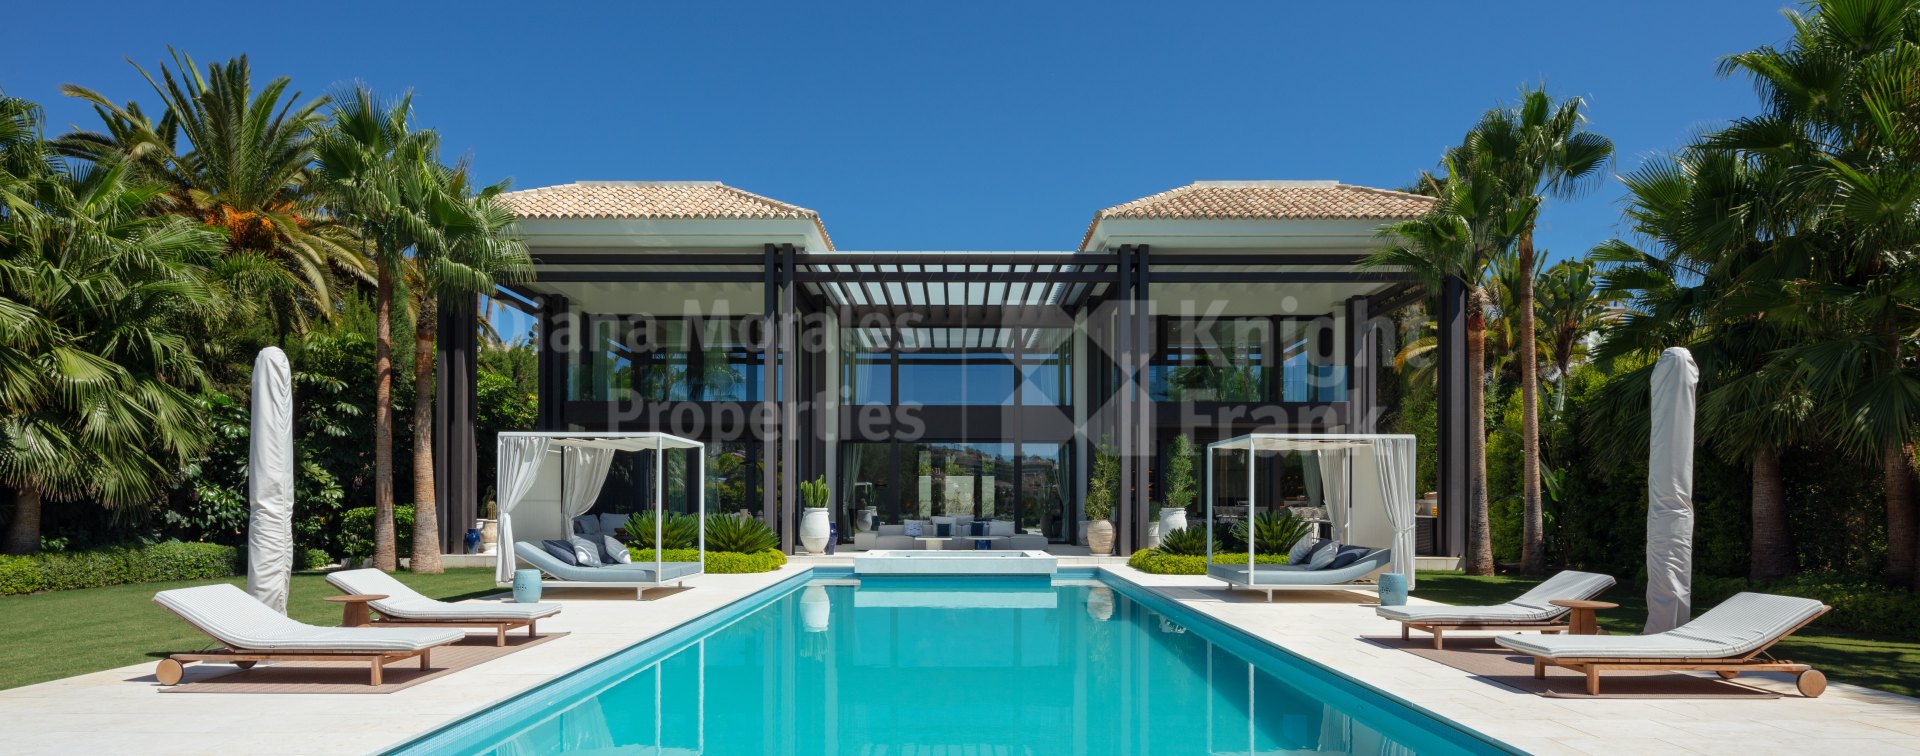 La Cerquilla, Exquisitely designed house on the front line of golf